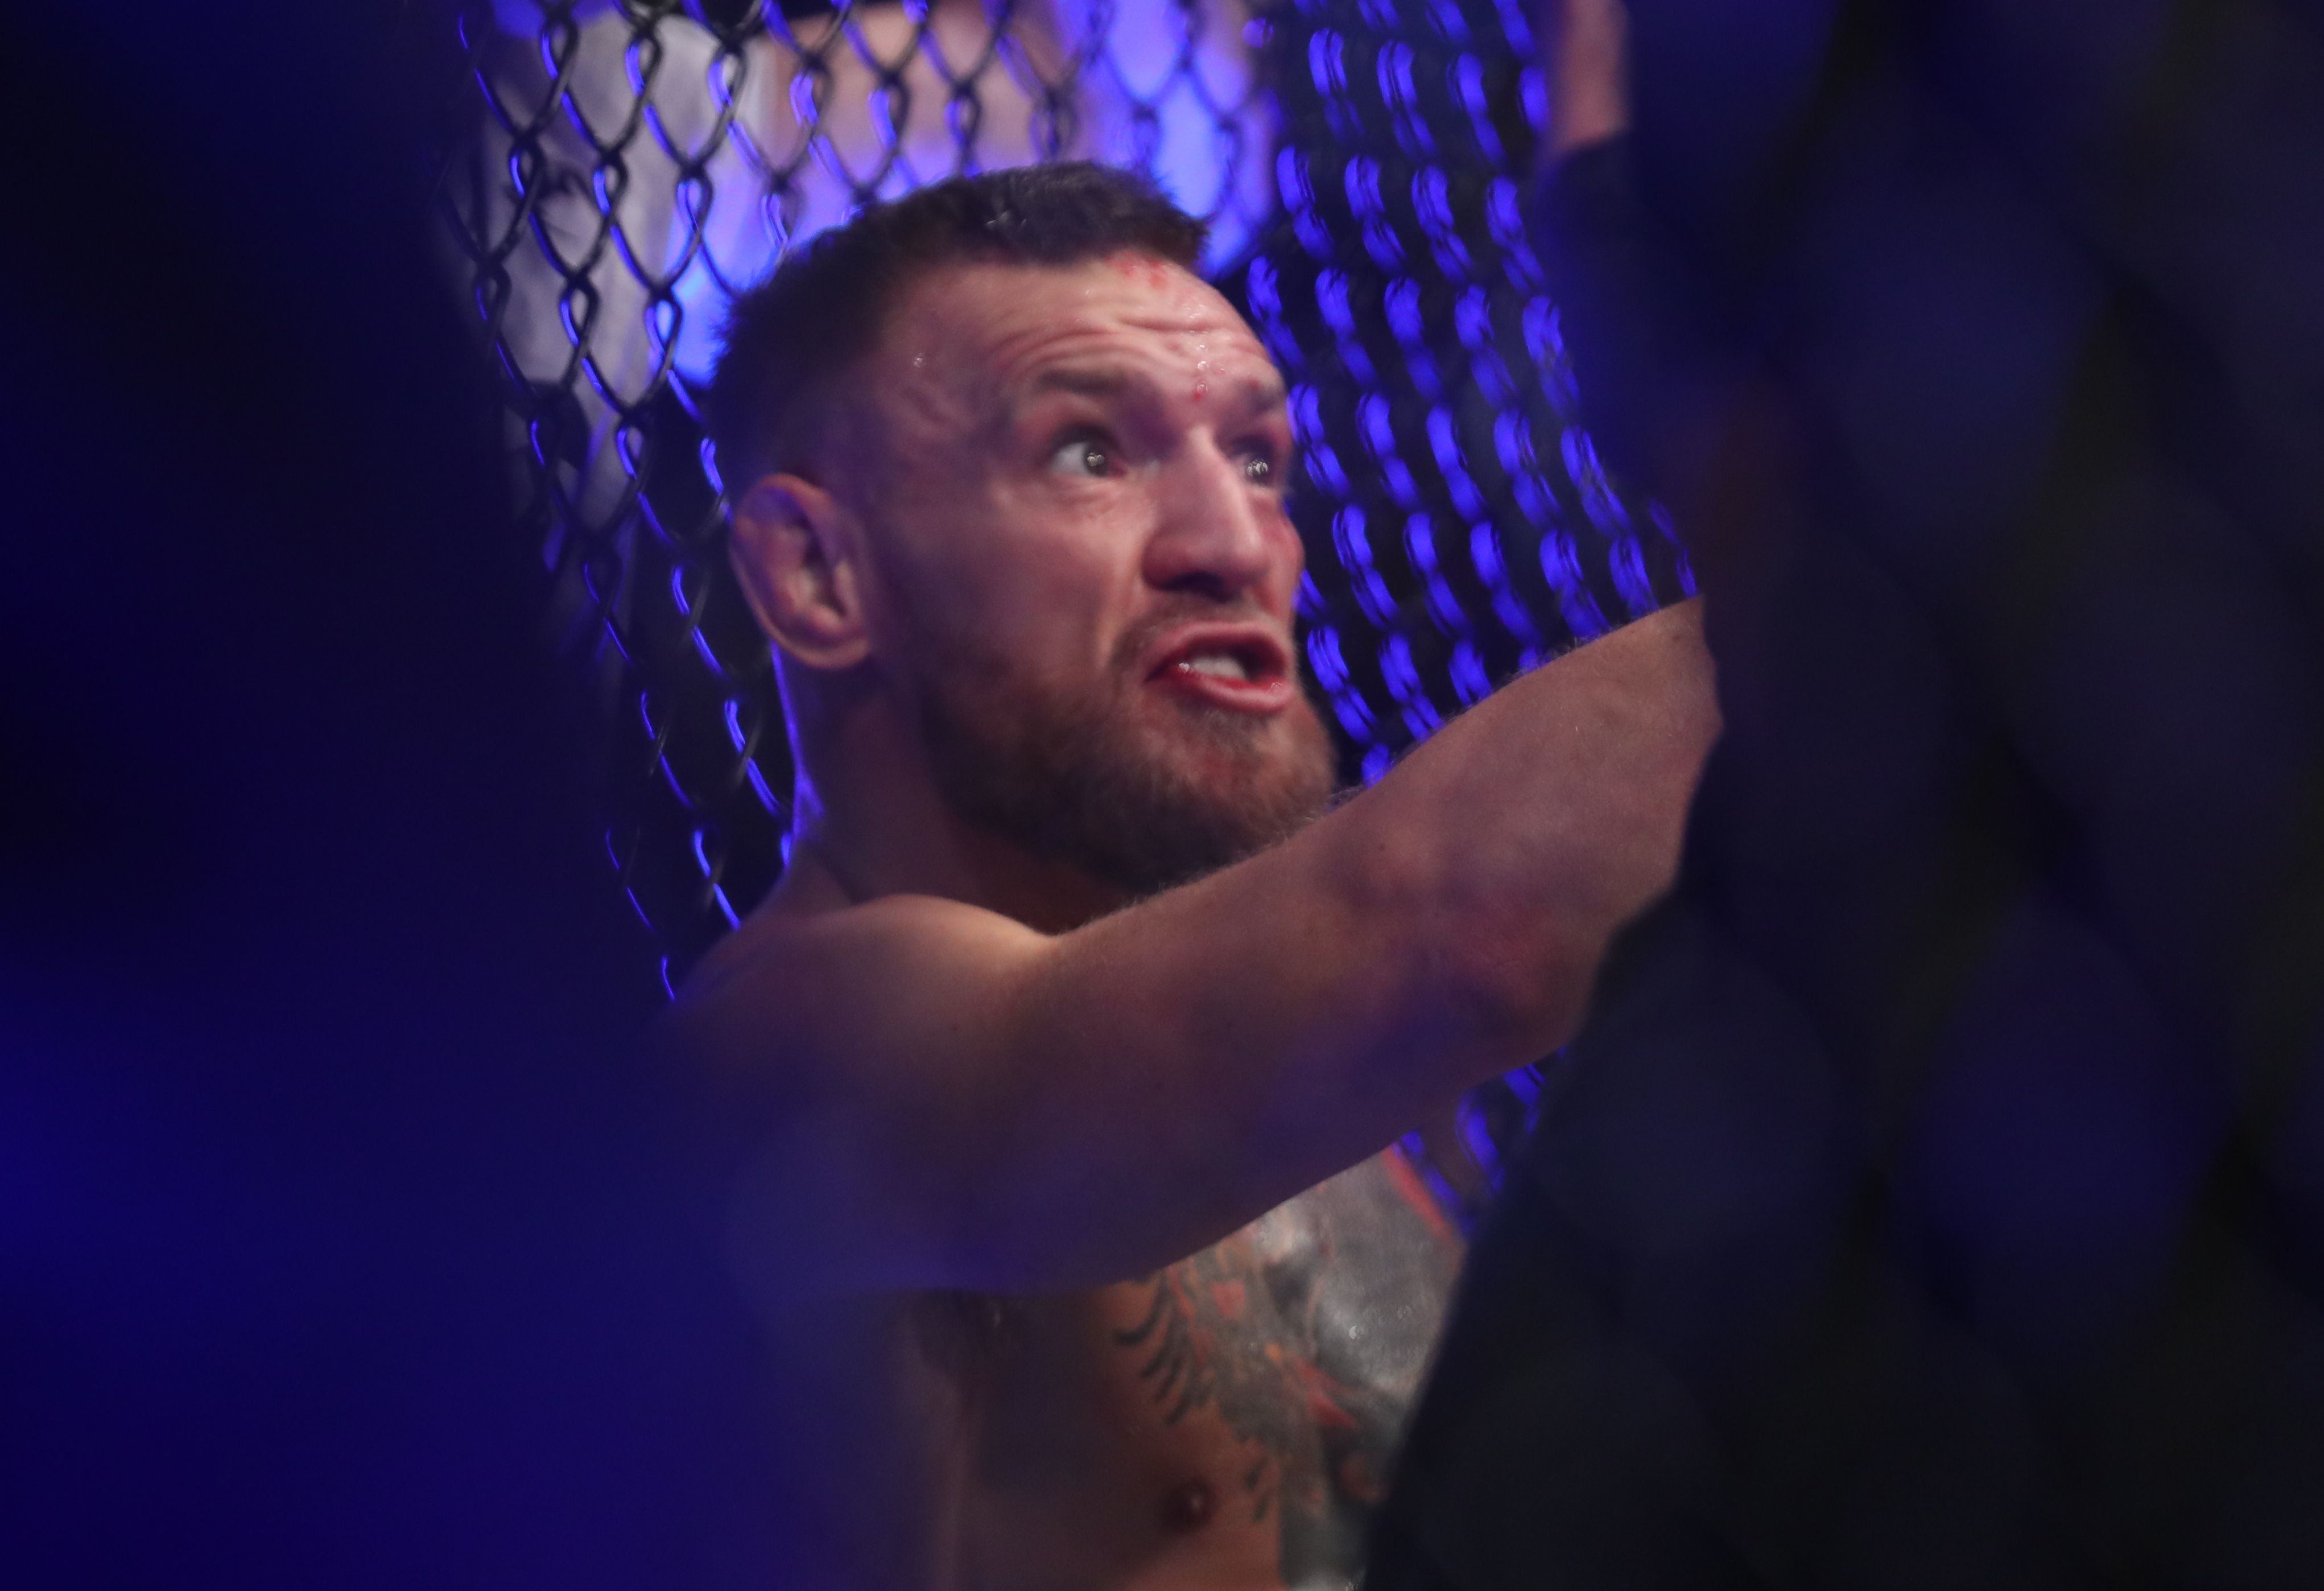 Michael Bisping has continued his war of words with Conor McGregor